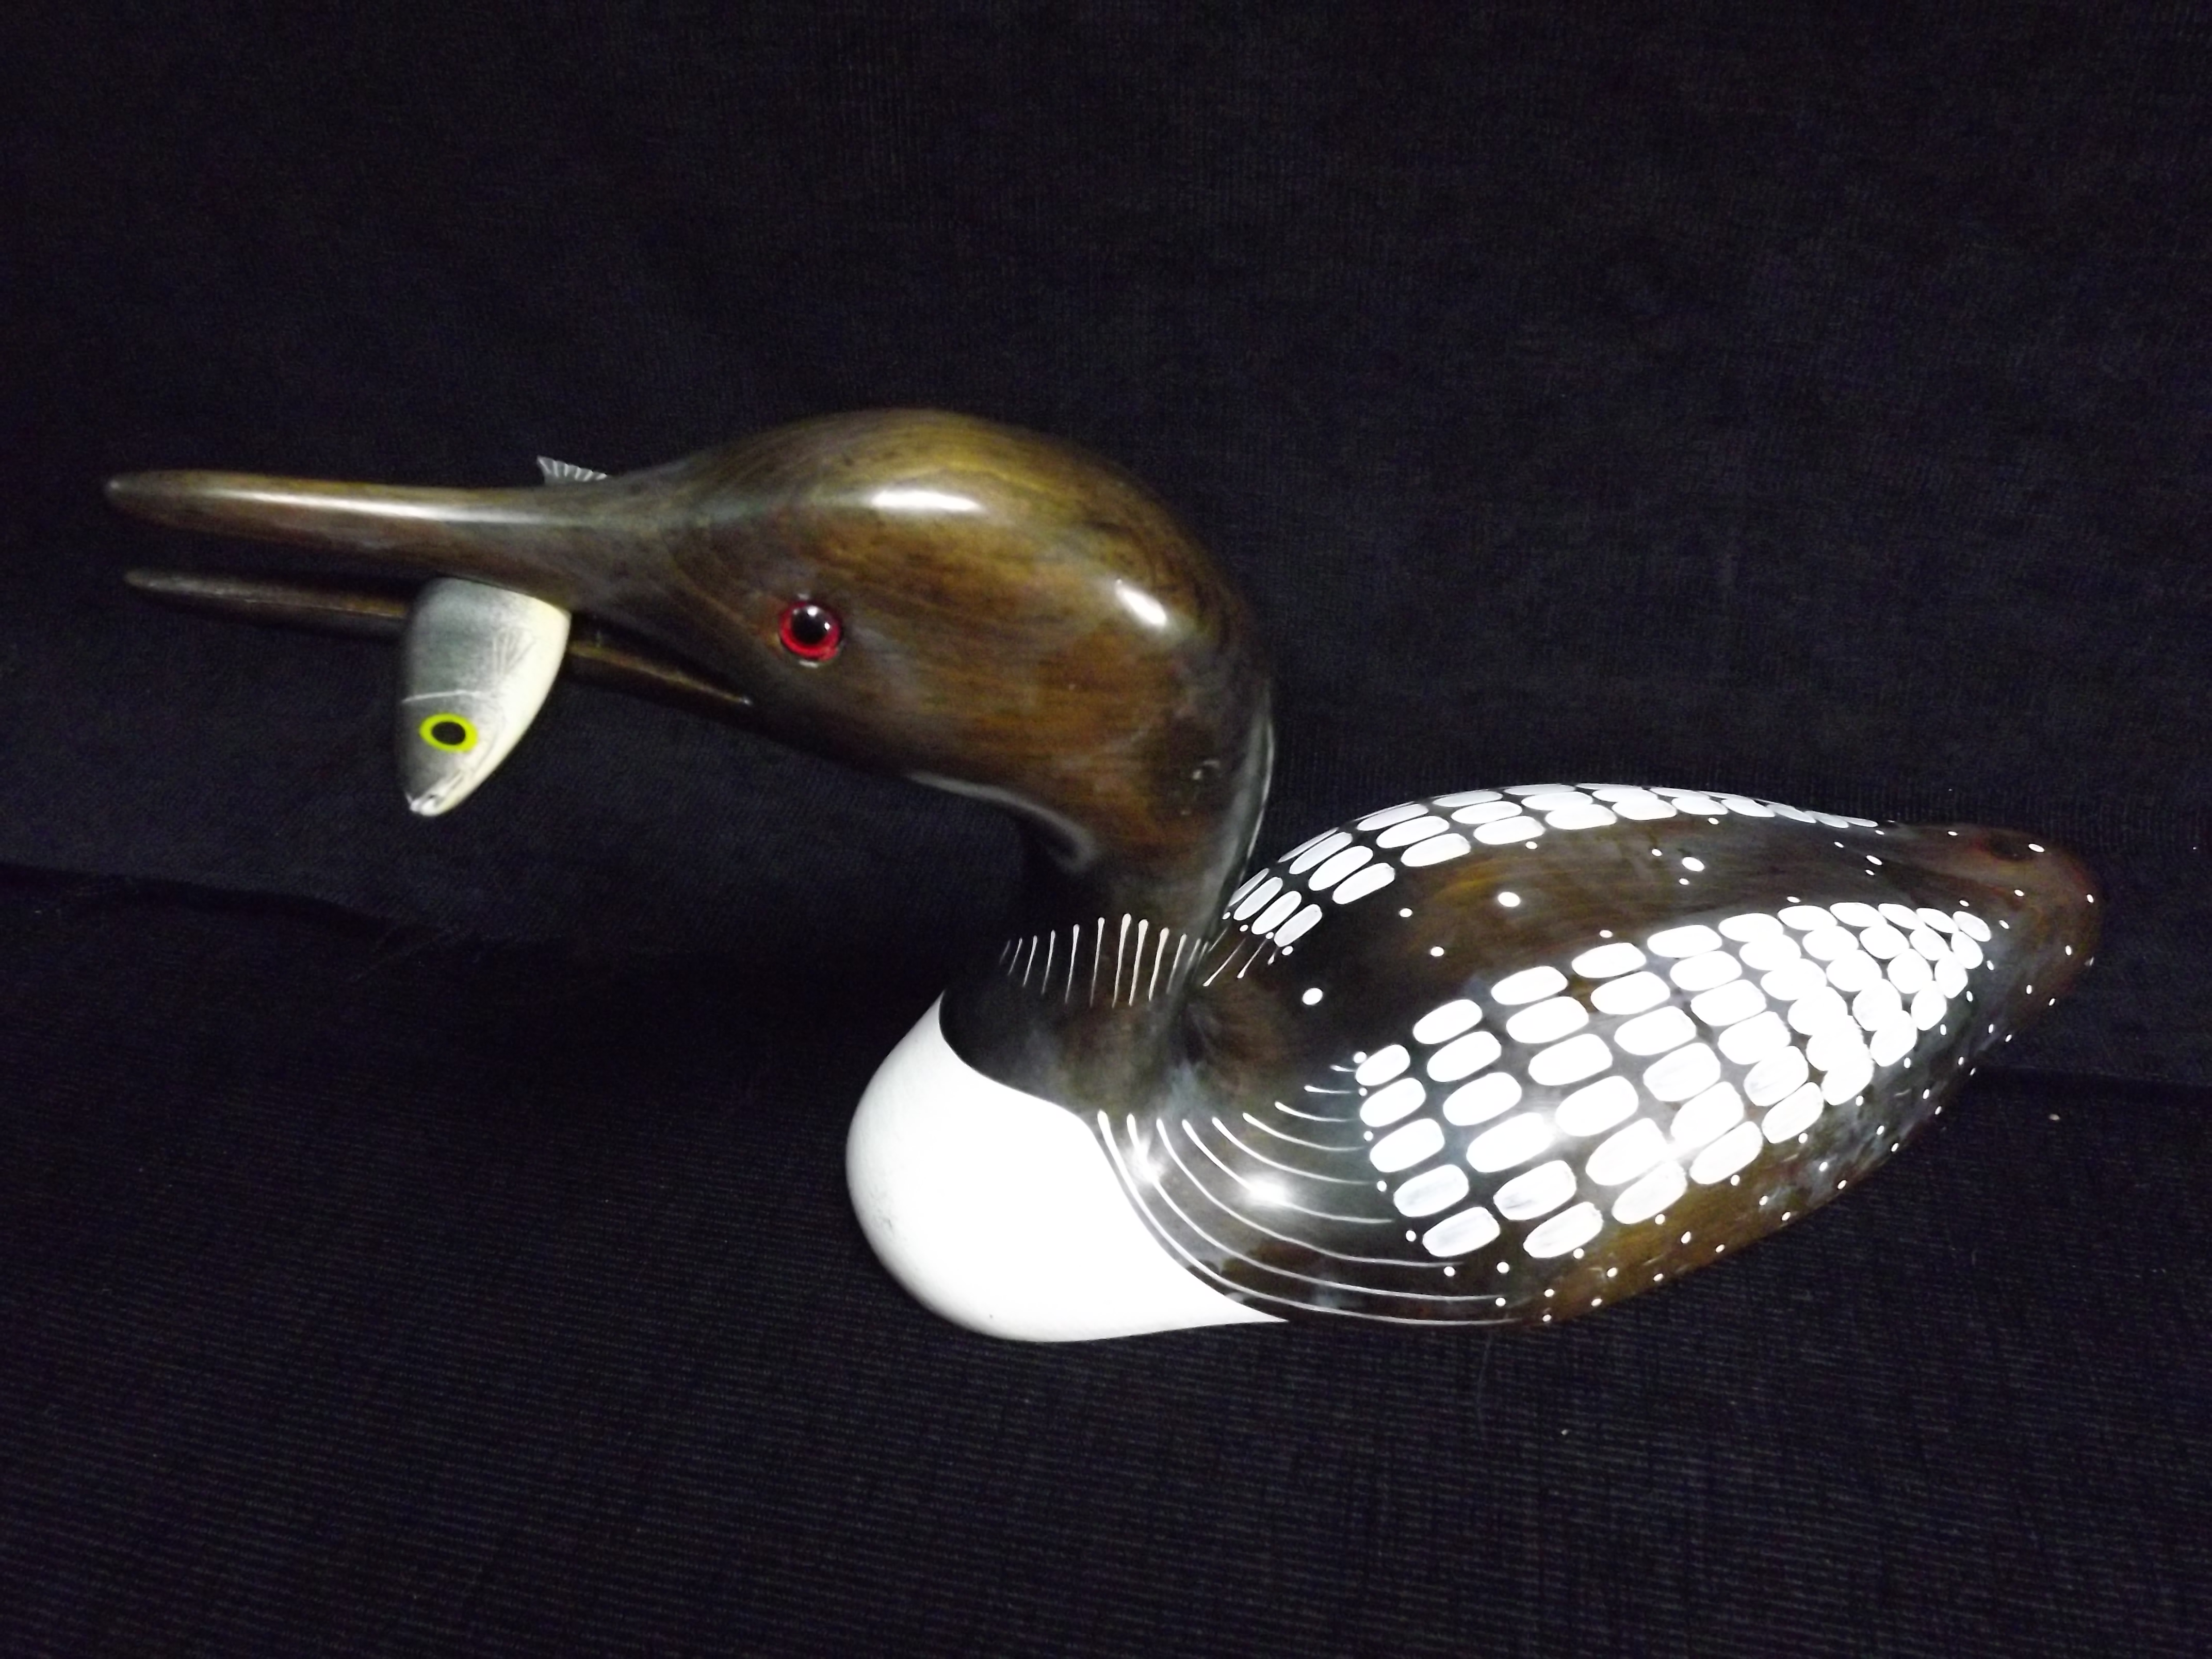 Canada Detlef Freese 'Calling Loon' - Carved Wooden Decoy Diver Bird 1990. Wooden detachable Fish in